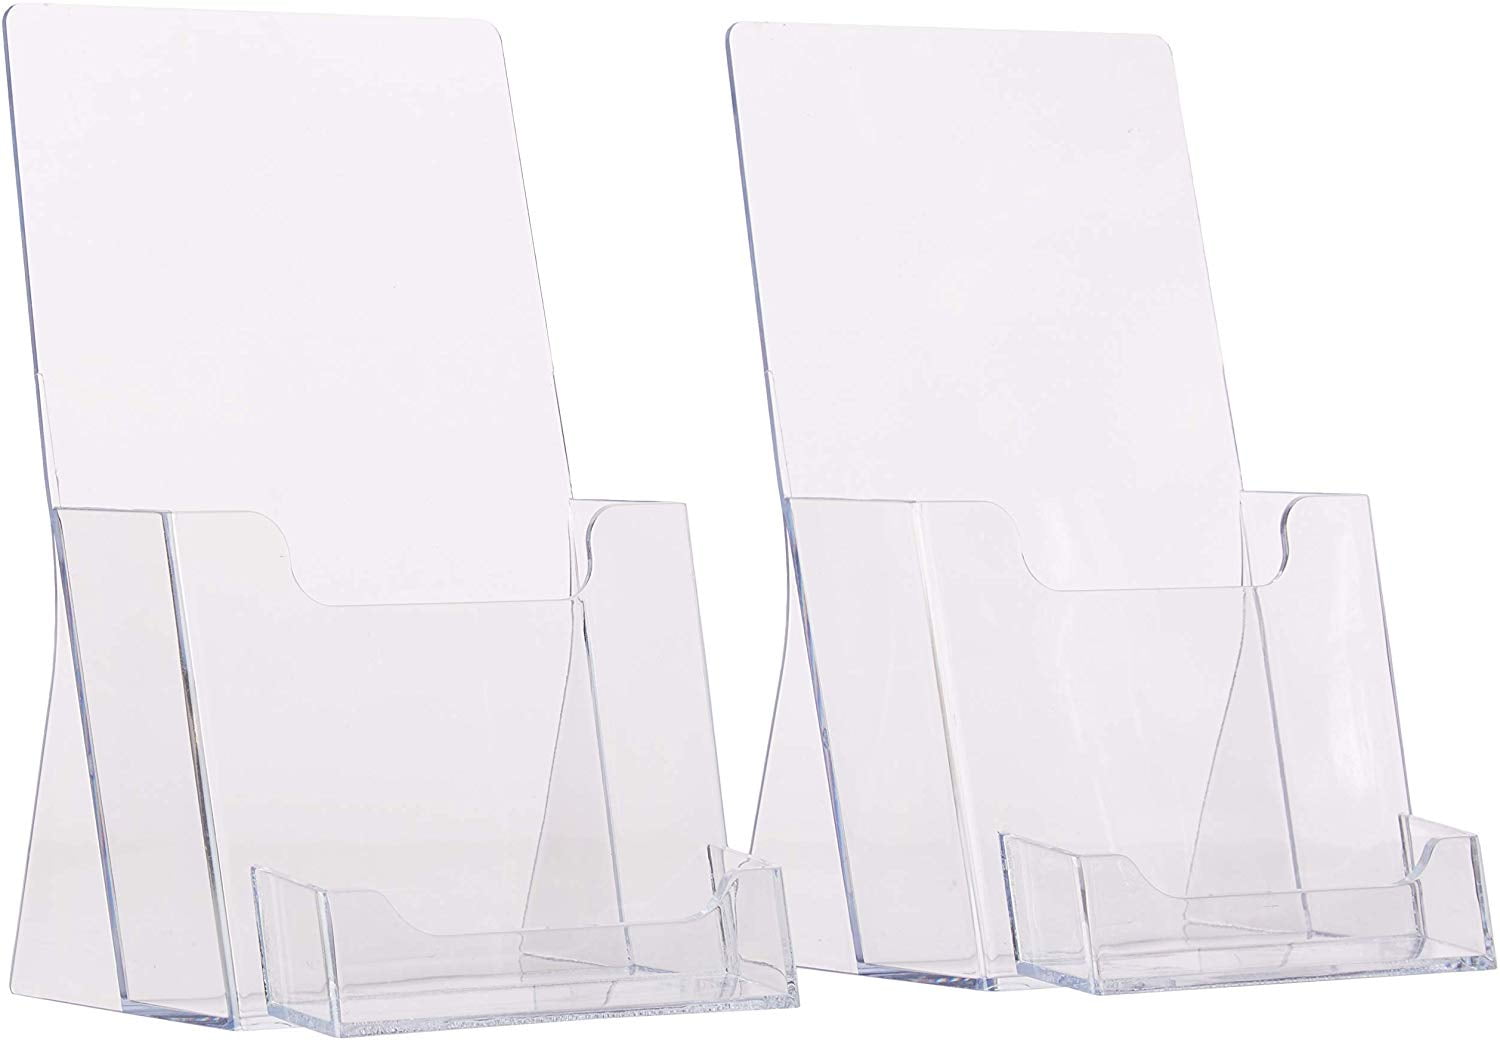 20 CLEAR TRI FOLD BROCHURE & BUSINESS CARD HOLDERS HOLDS 4" WIDE LITERATURE 